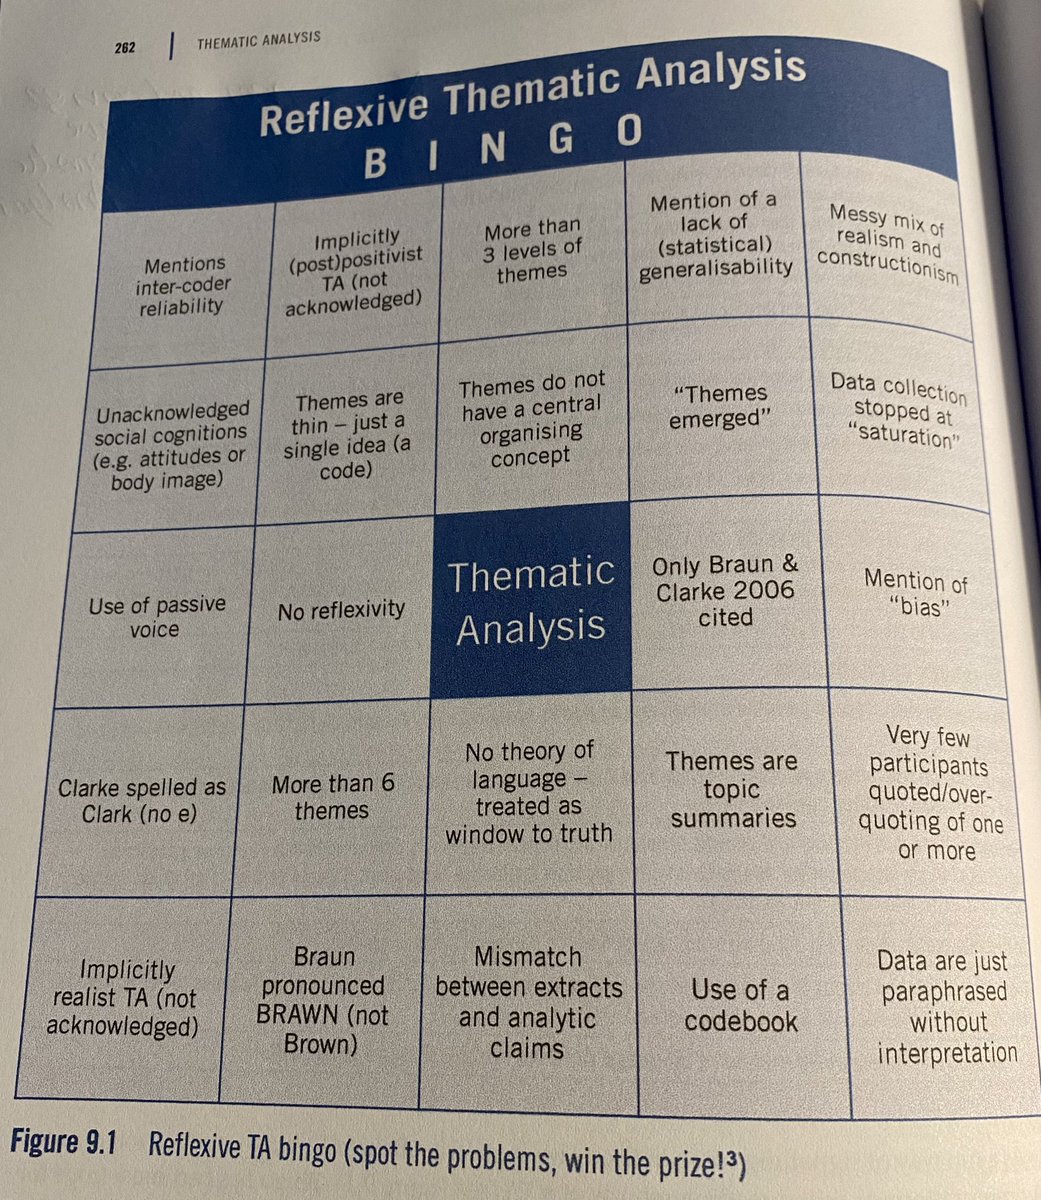 Have nearly finished reading @ginnybraun & @drvicclarke Thematic Analysis: A Practical Guide. Very useful to refresh my teaching of data analysis and own research skills.

Just found the Reflexive TA bingo card - need to ensure I can’t cross any of these off in any future work 🫣